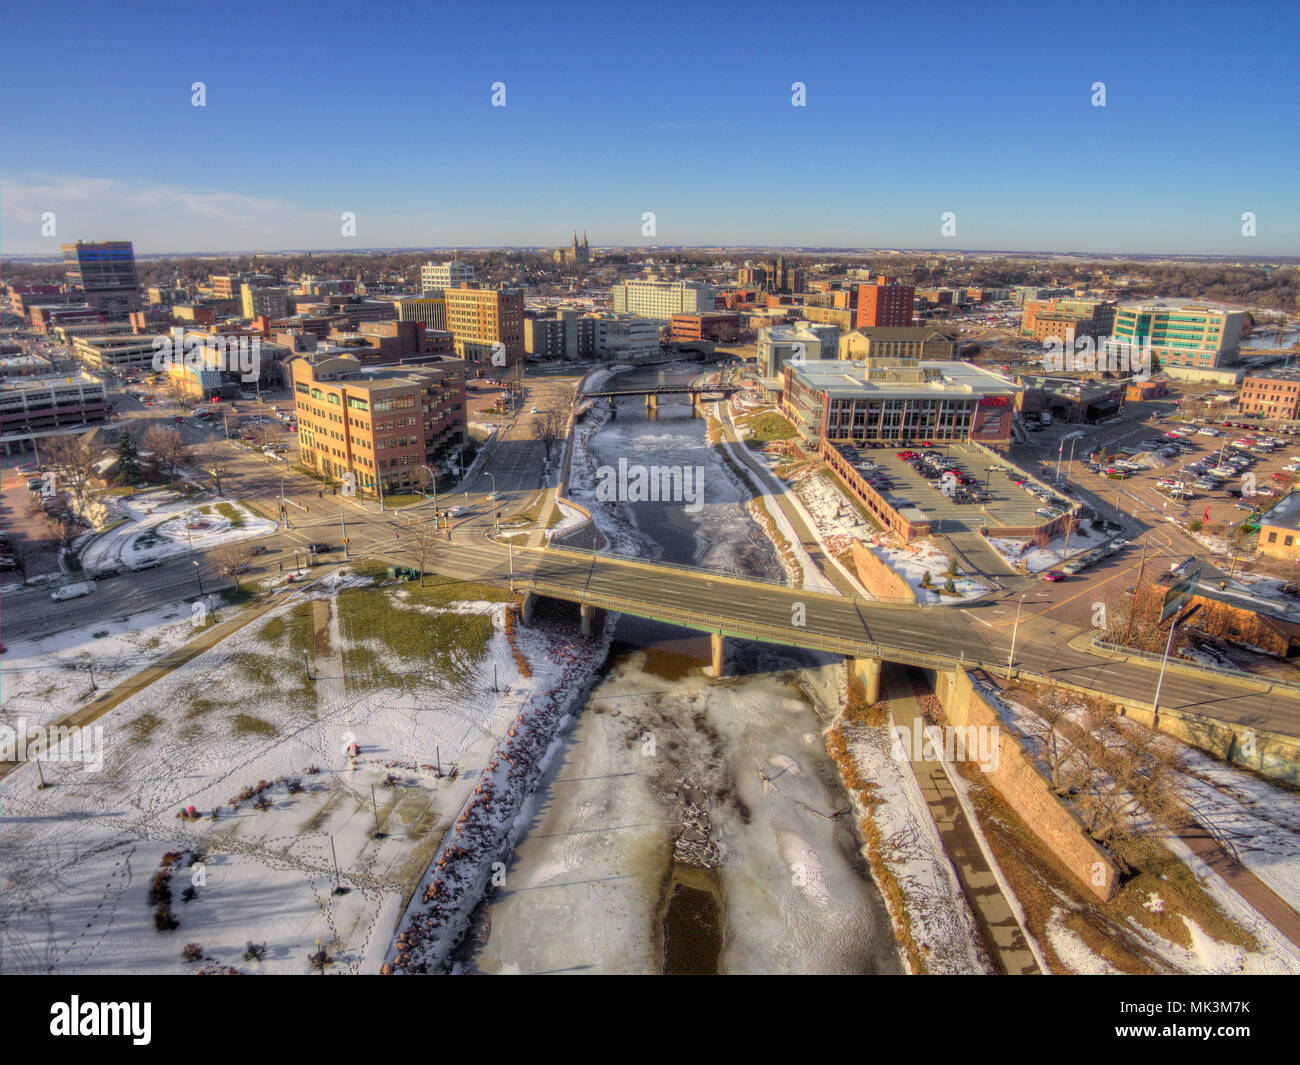 Sioux falls south dakota downtown hires stock photography and images